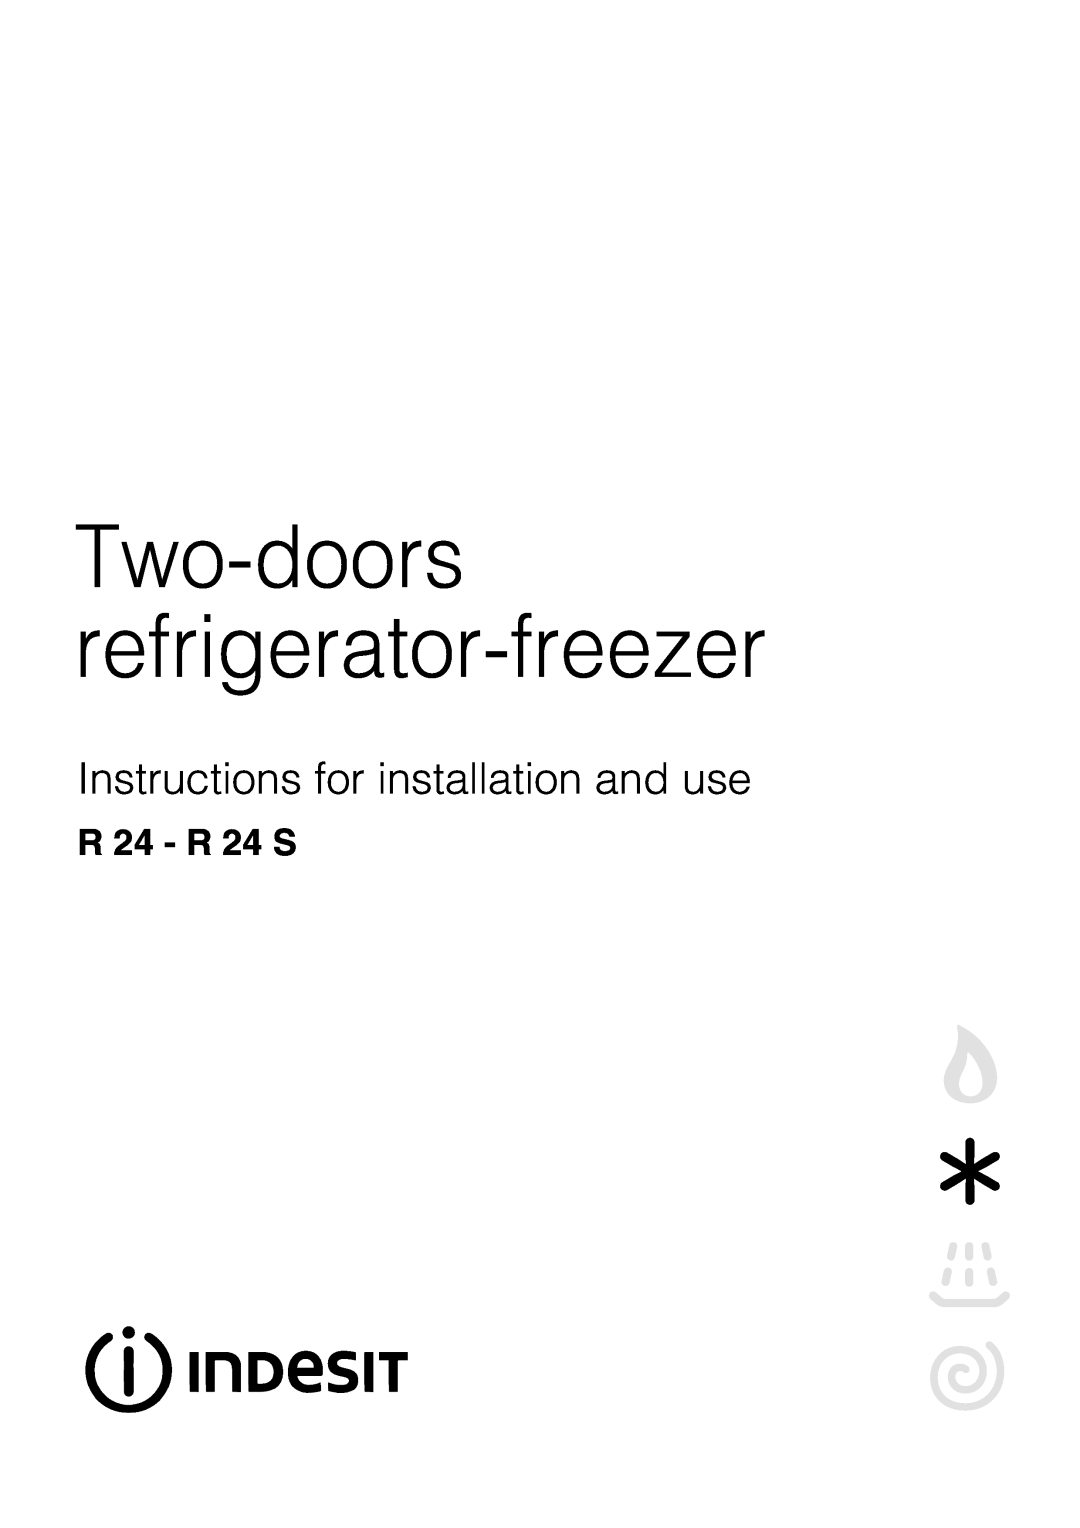 Indesit R 24 - R 24 S manual Two-doors refrigerator-freezer, Instructions for installation and use 